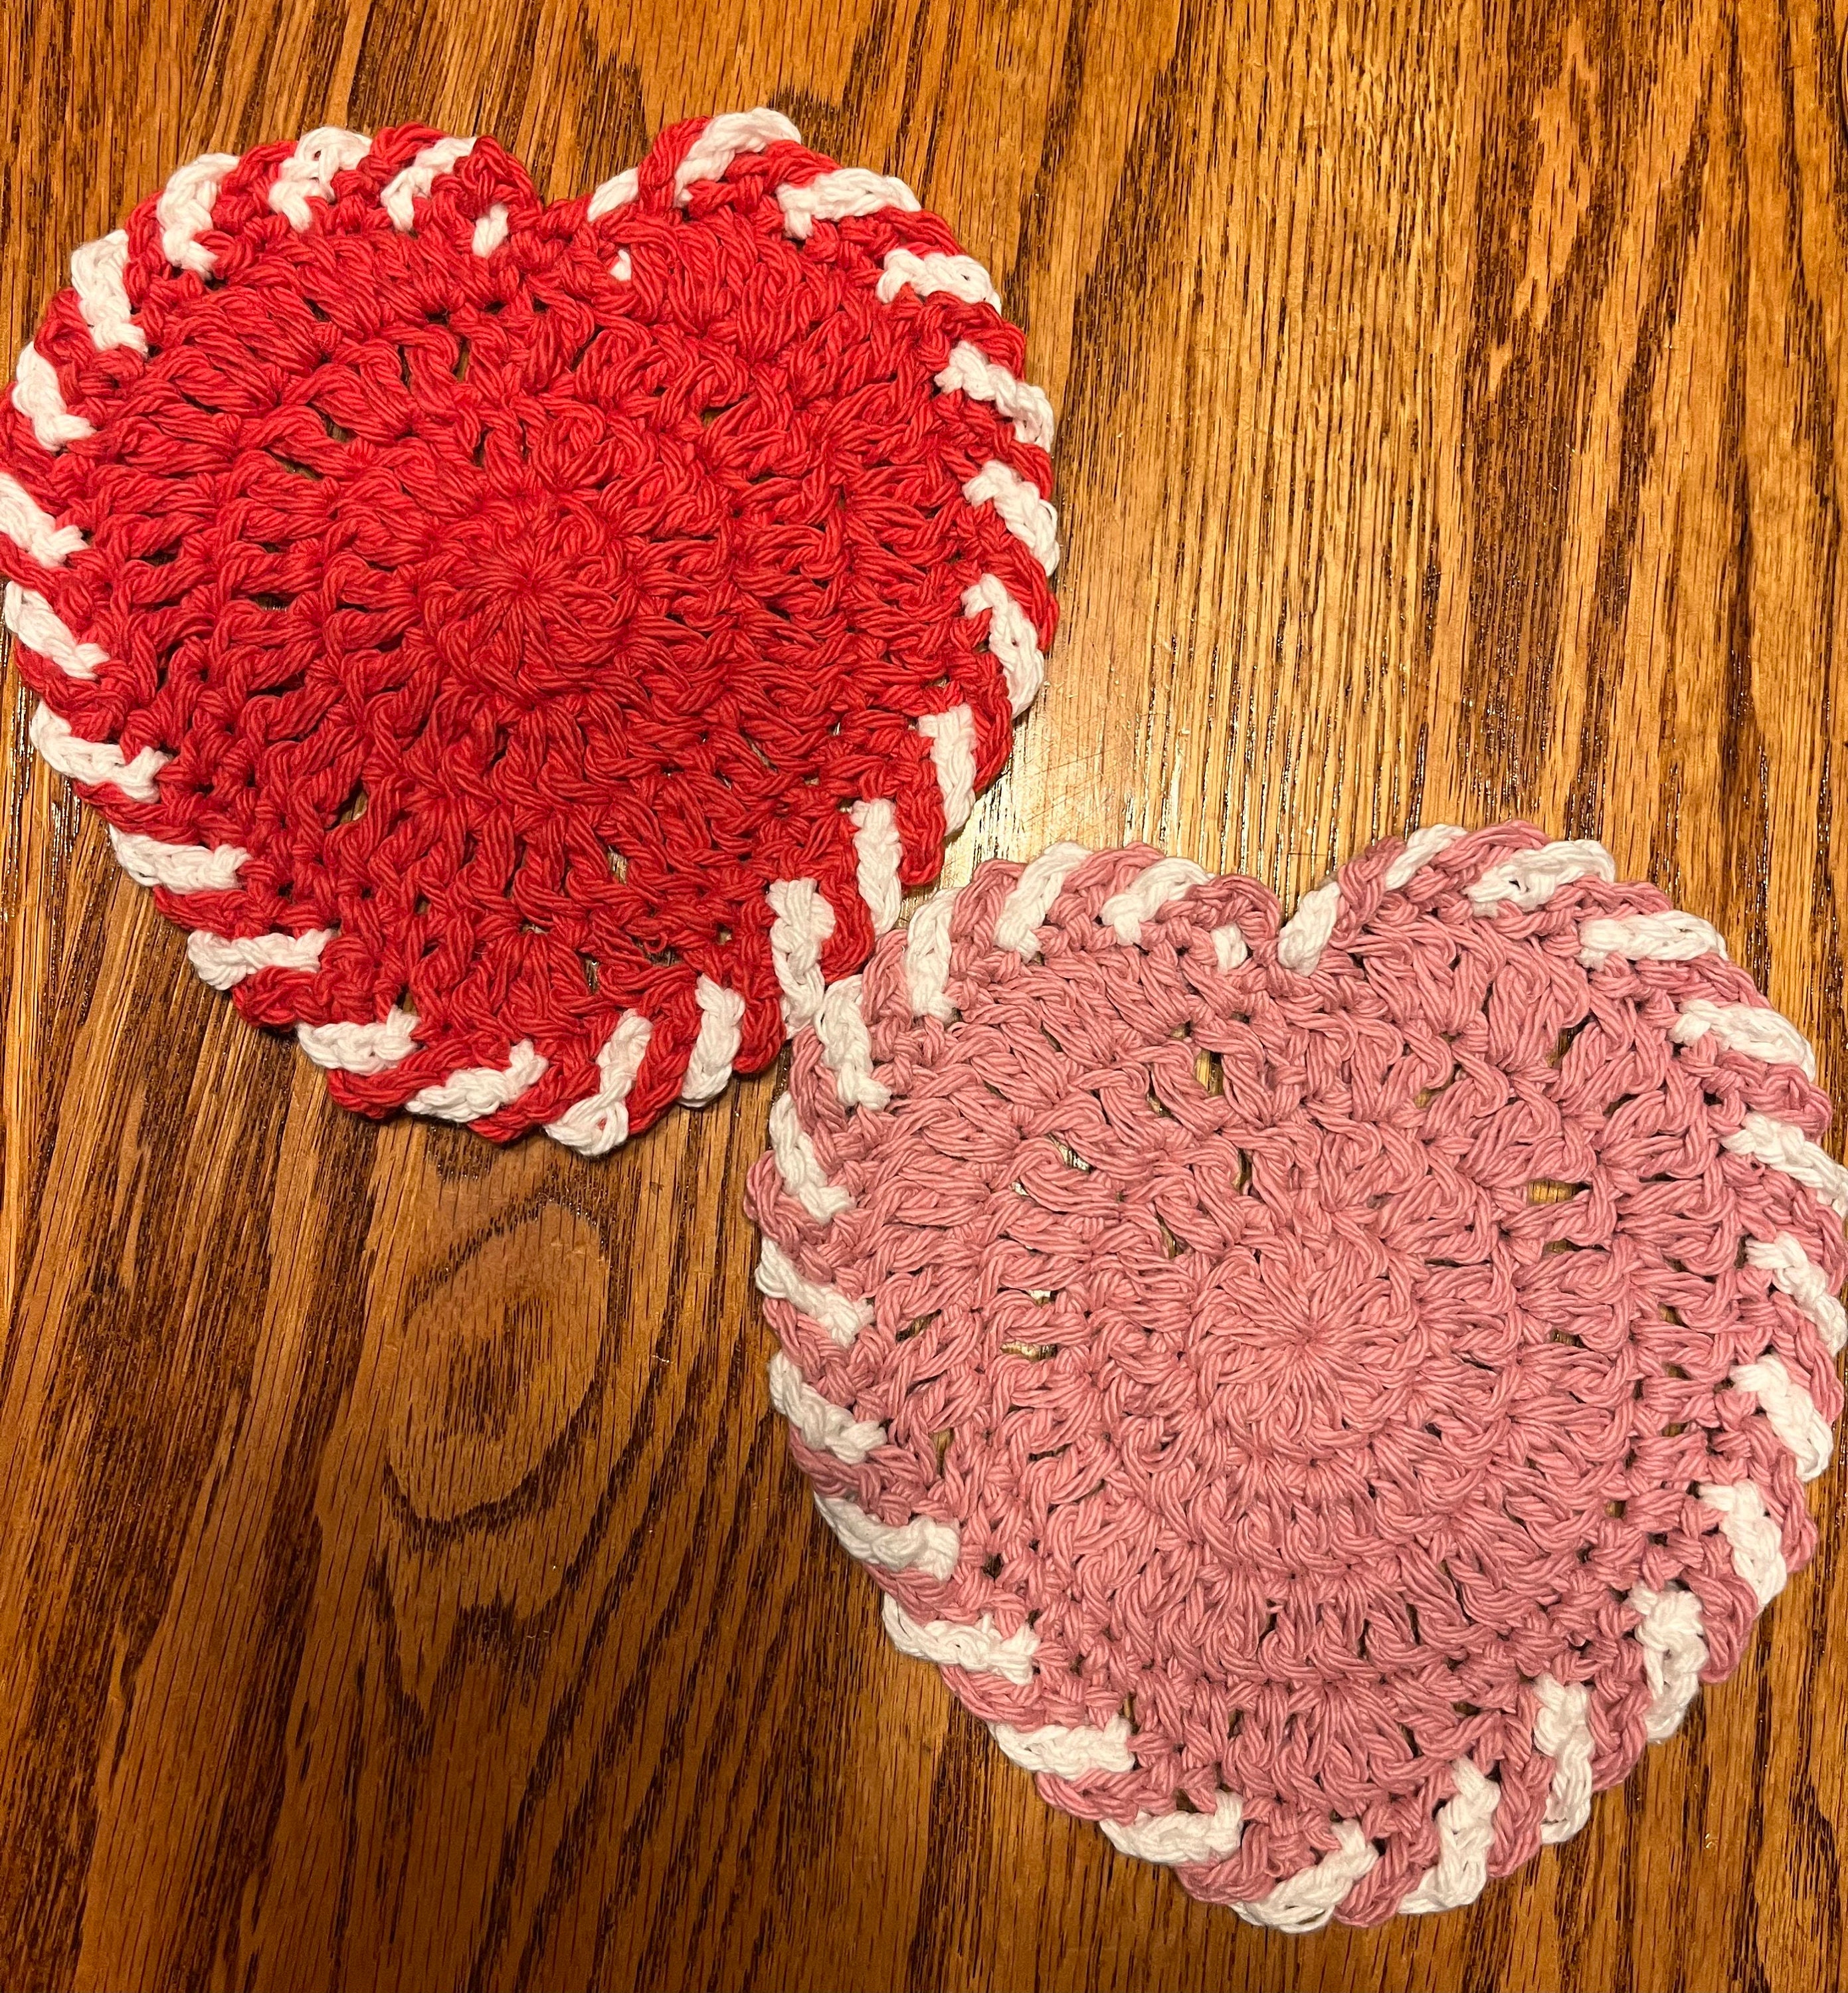 Valentines day gift,other occasions Heart & rose lace coasters pack of 2 or 4 